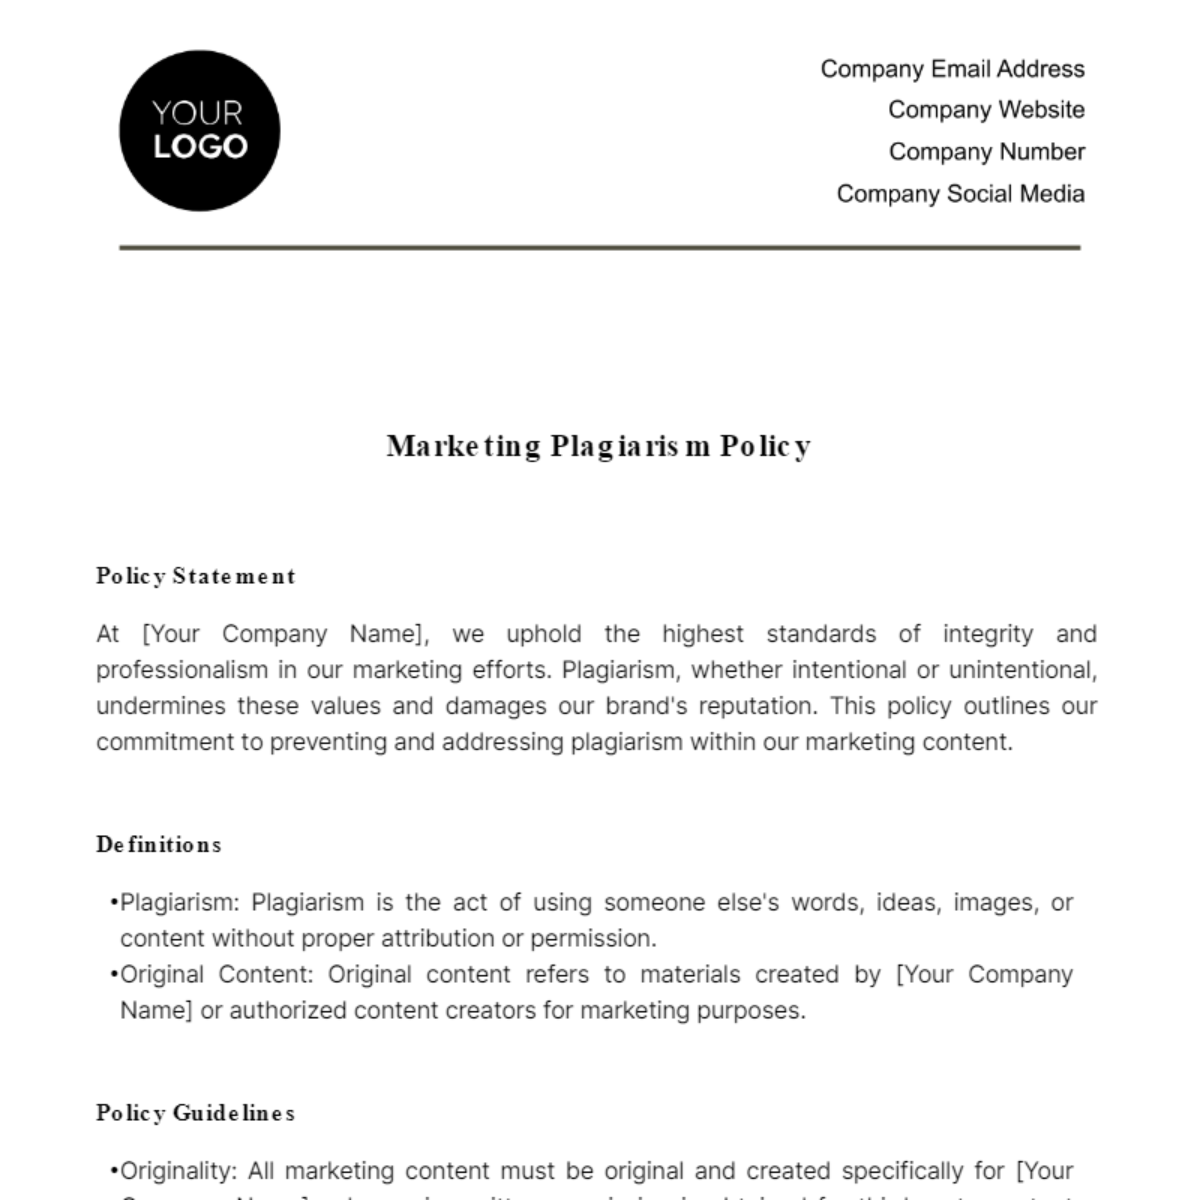 Marketing Plagiarism Policy Template